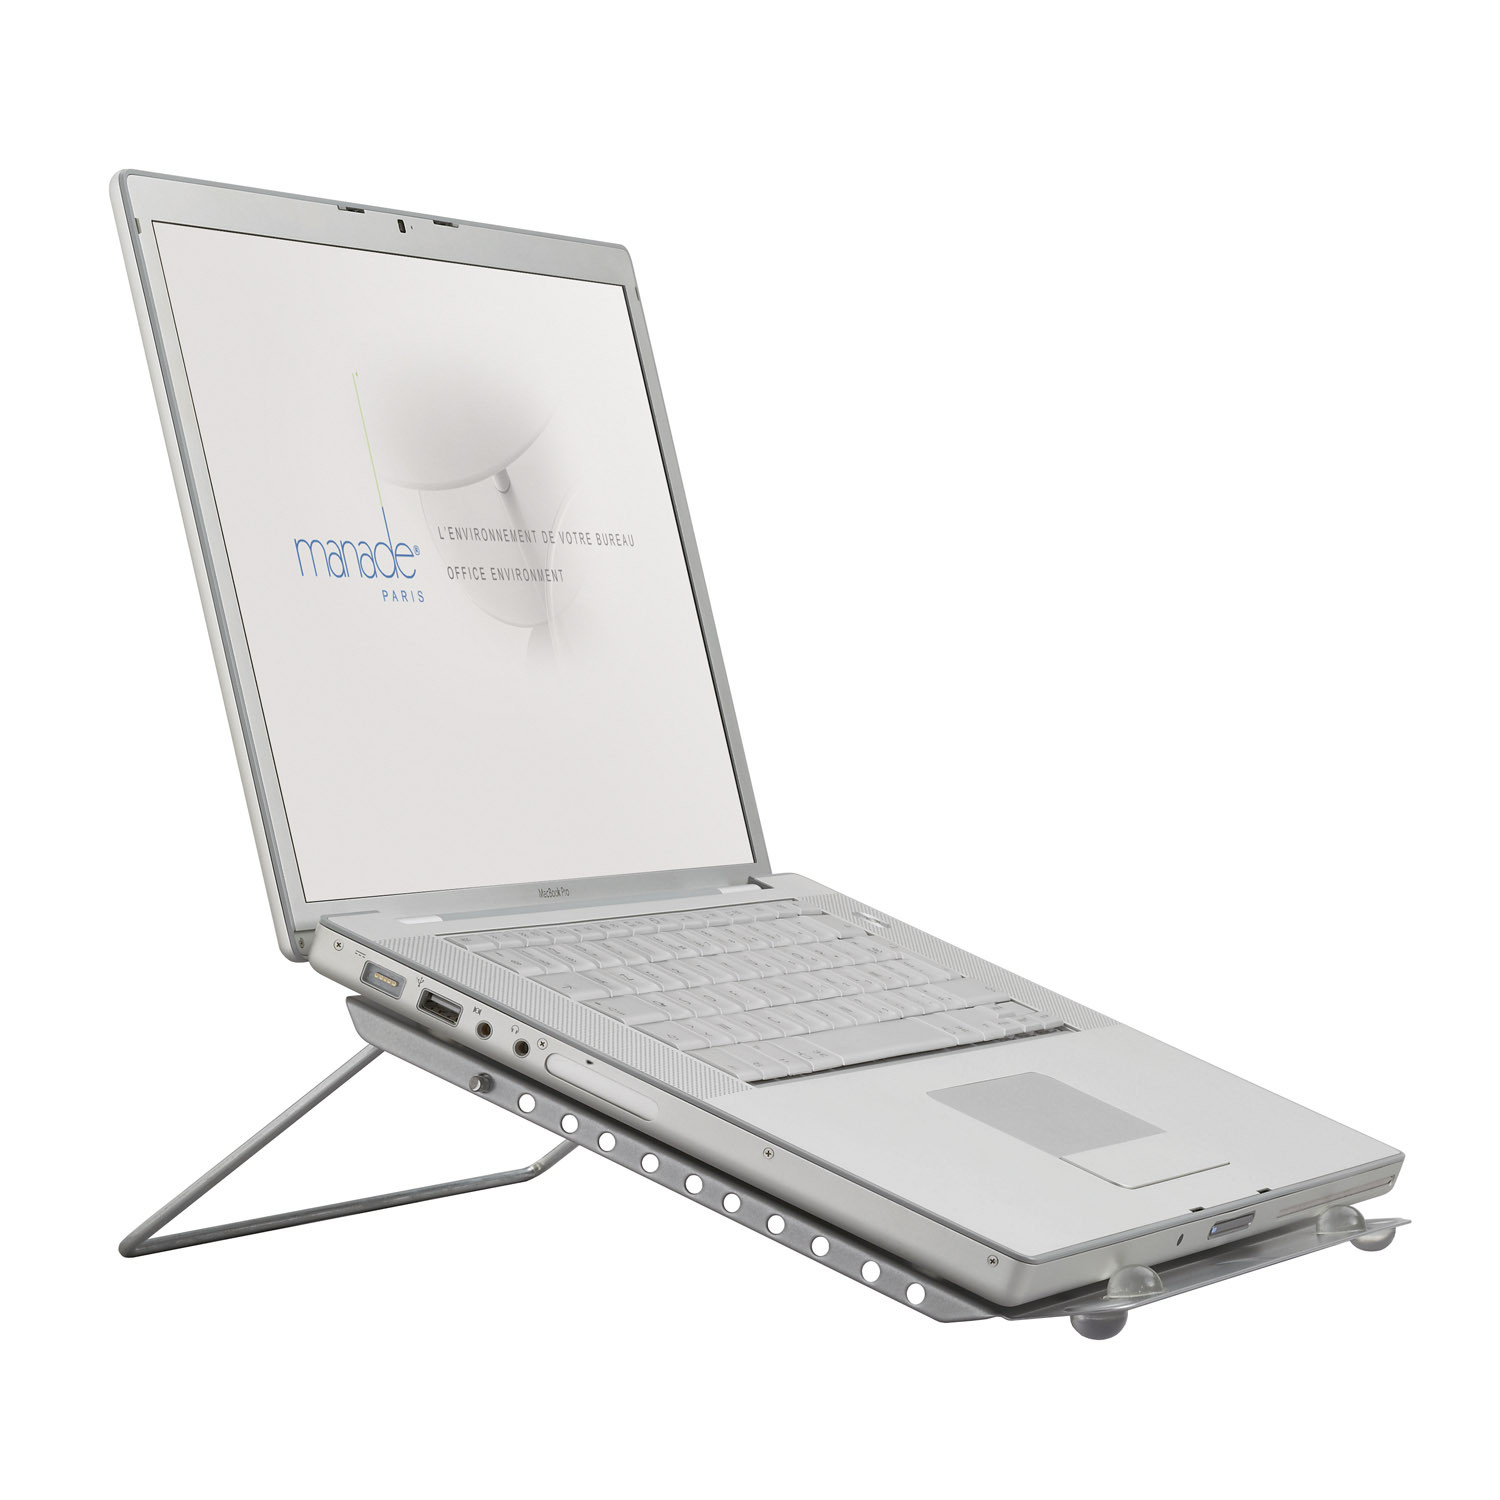 Lapsup Laptop Stand by Apres Furniture